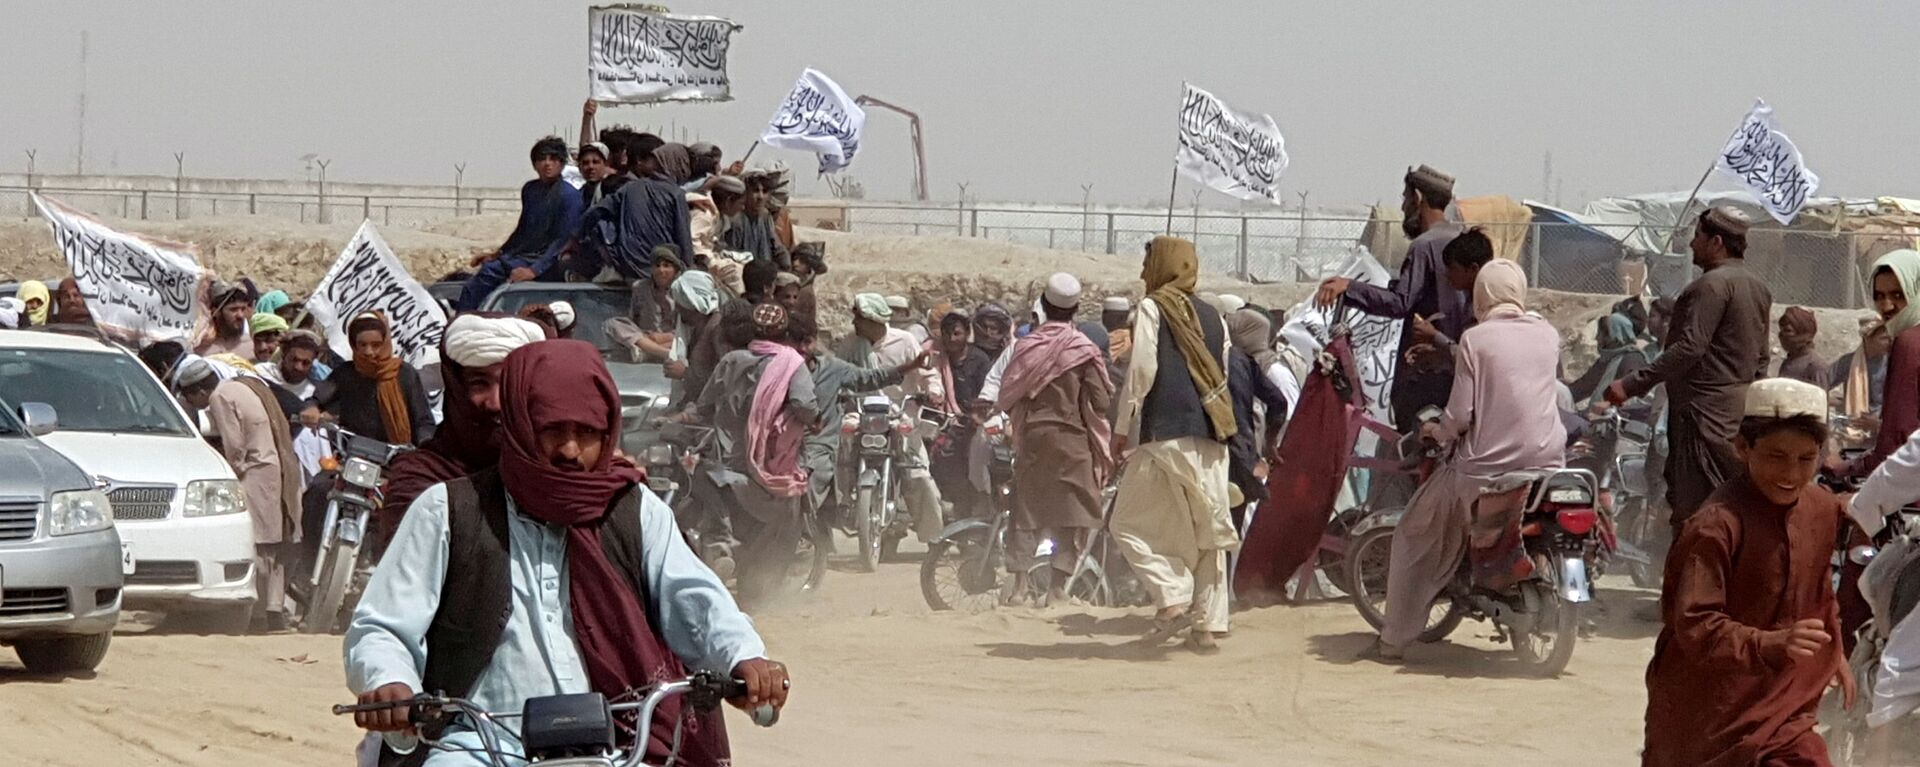 People on vehicles, holding Taliban flags, gather near the Friendship Gate crossing point in the Pakistan-Afghanistan border town of Chaman, Pakistan July 14, 2021 - Sputnik International, 1920, 16.07.2021